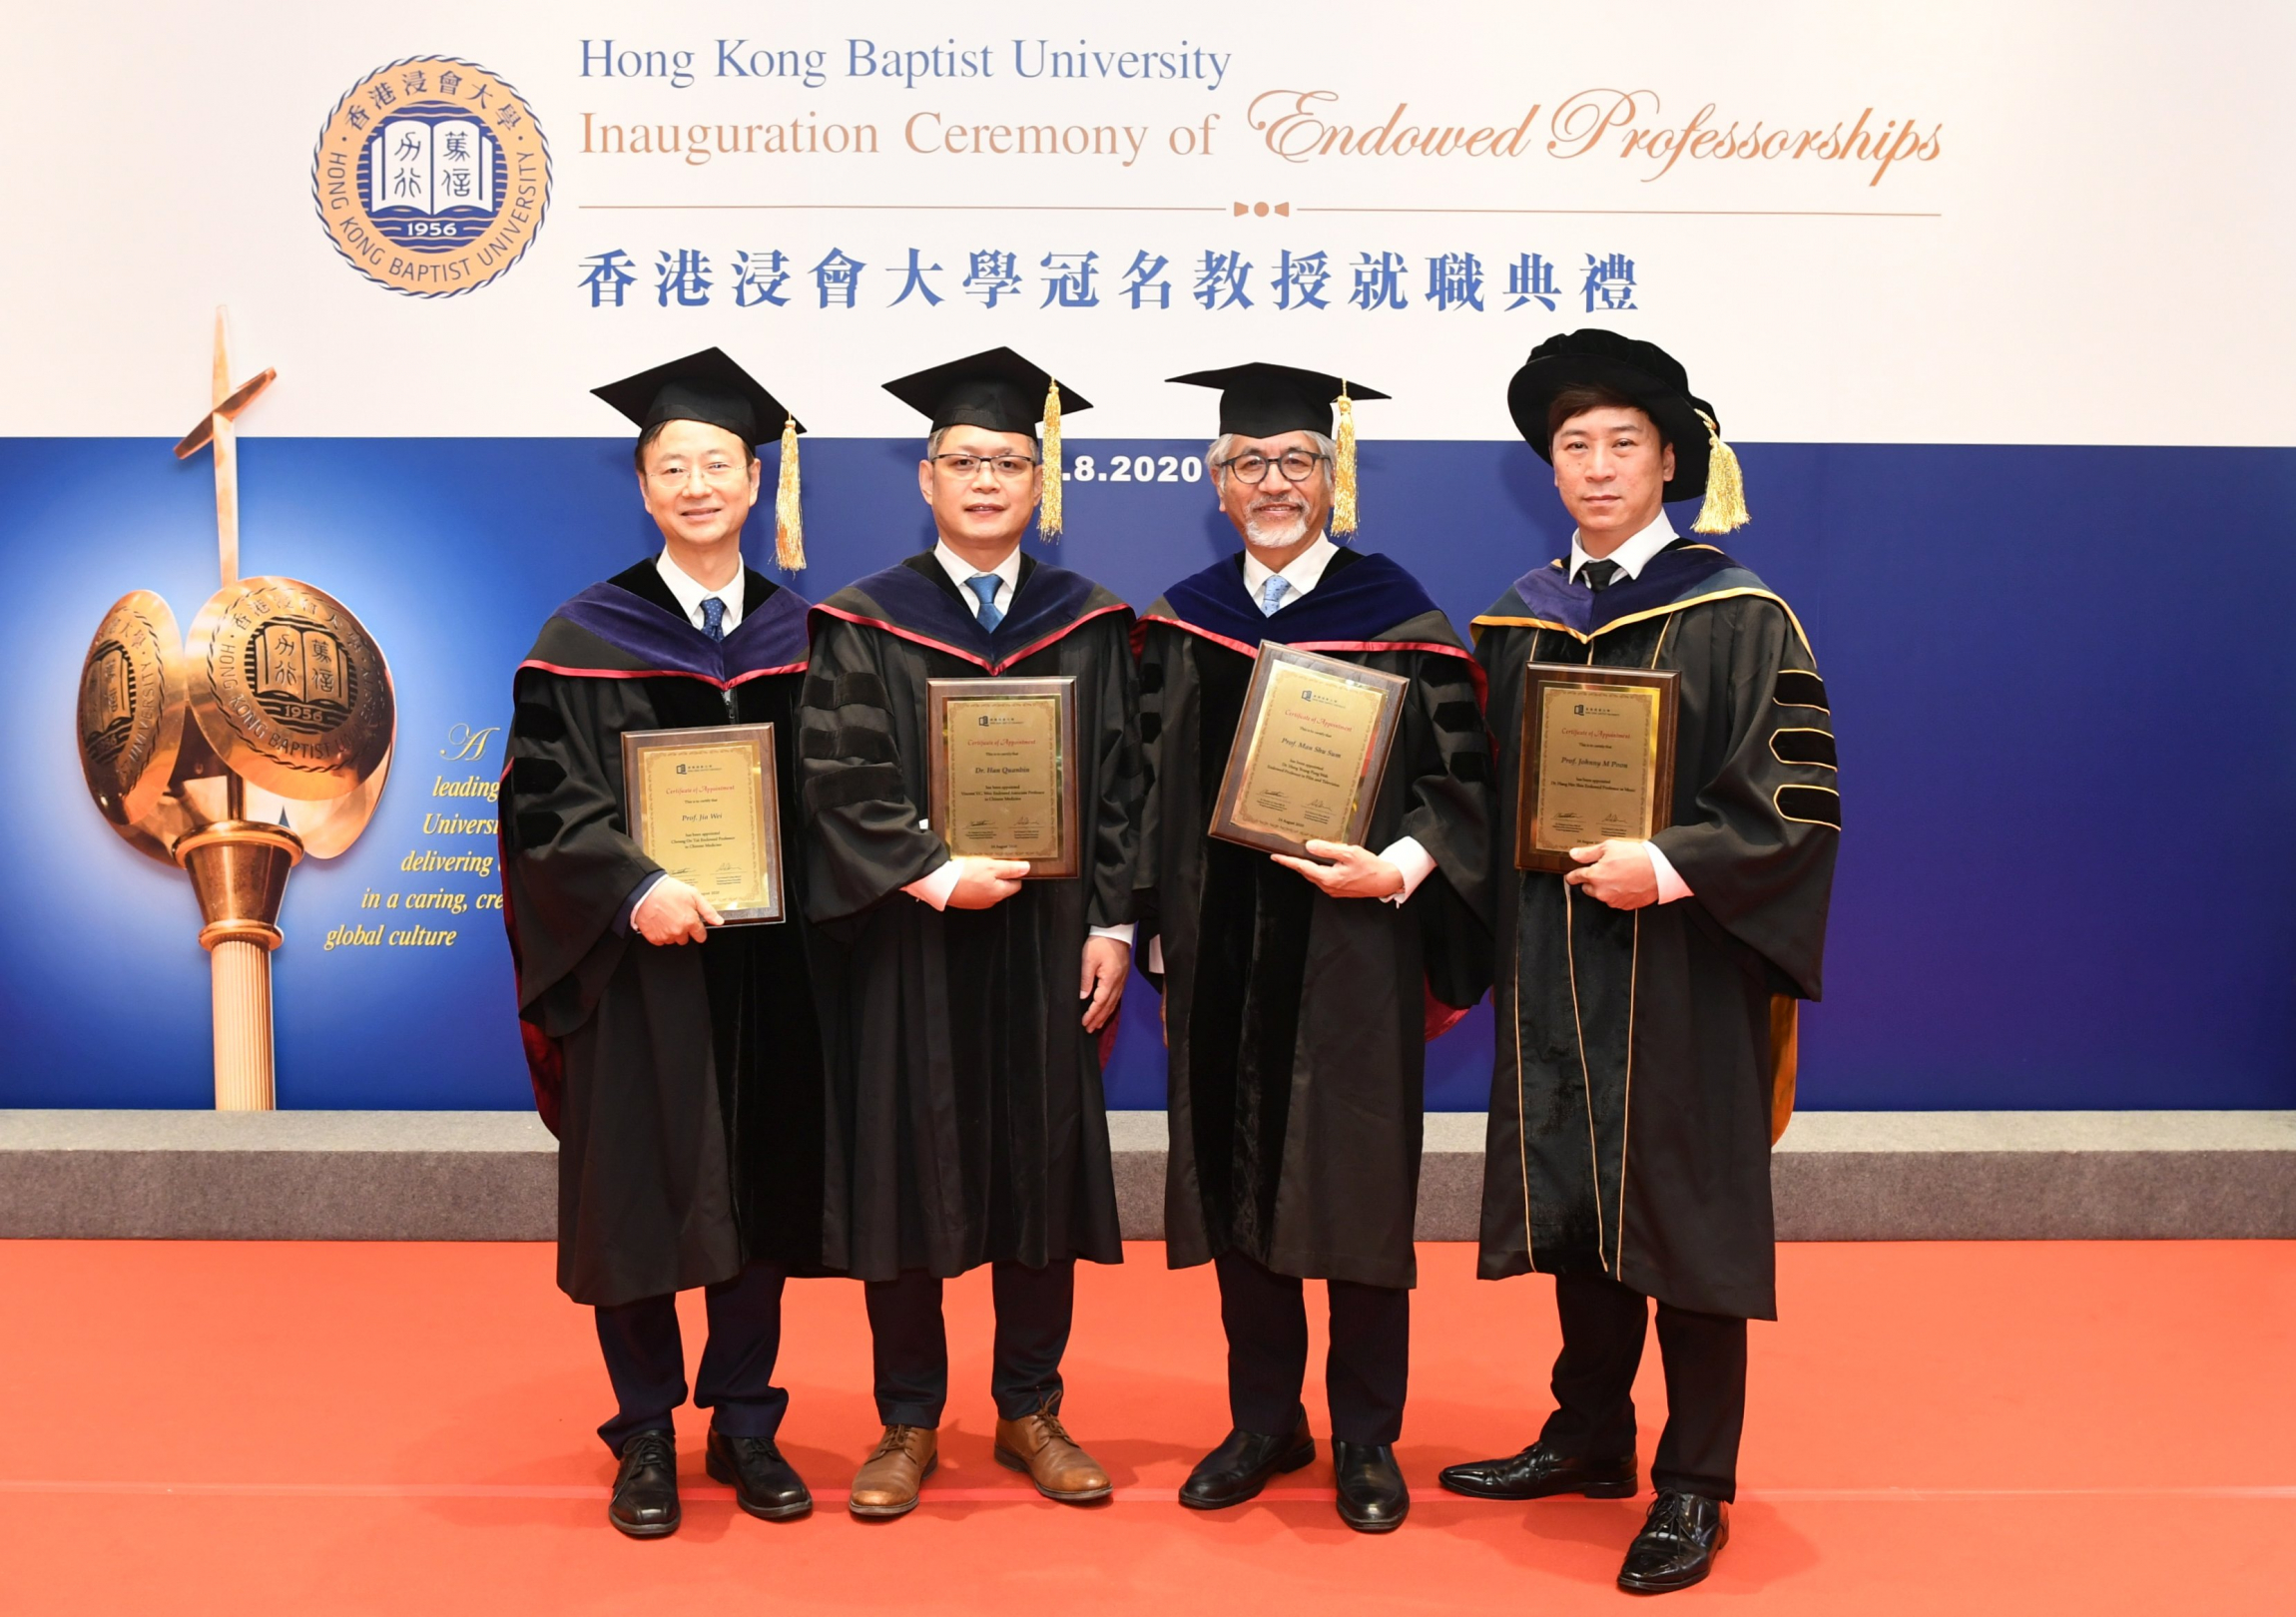 (From left) Professor Jia Wei, Cheung On Tak Endowed Professor in Chinese Medicine; Dr Han Quanbin, Vincent V.C. Woo Endowed Associate Professor in Chinese Medicine; Professor Man Shu-sum, Dr Hung Yeung Pong Wah Endowed Professor in Film and Television; and Professor Johnny Poon Ming-lun, Dr Hung Hin Shiu Endowed Professor in Music